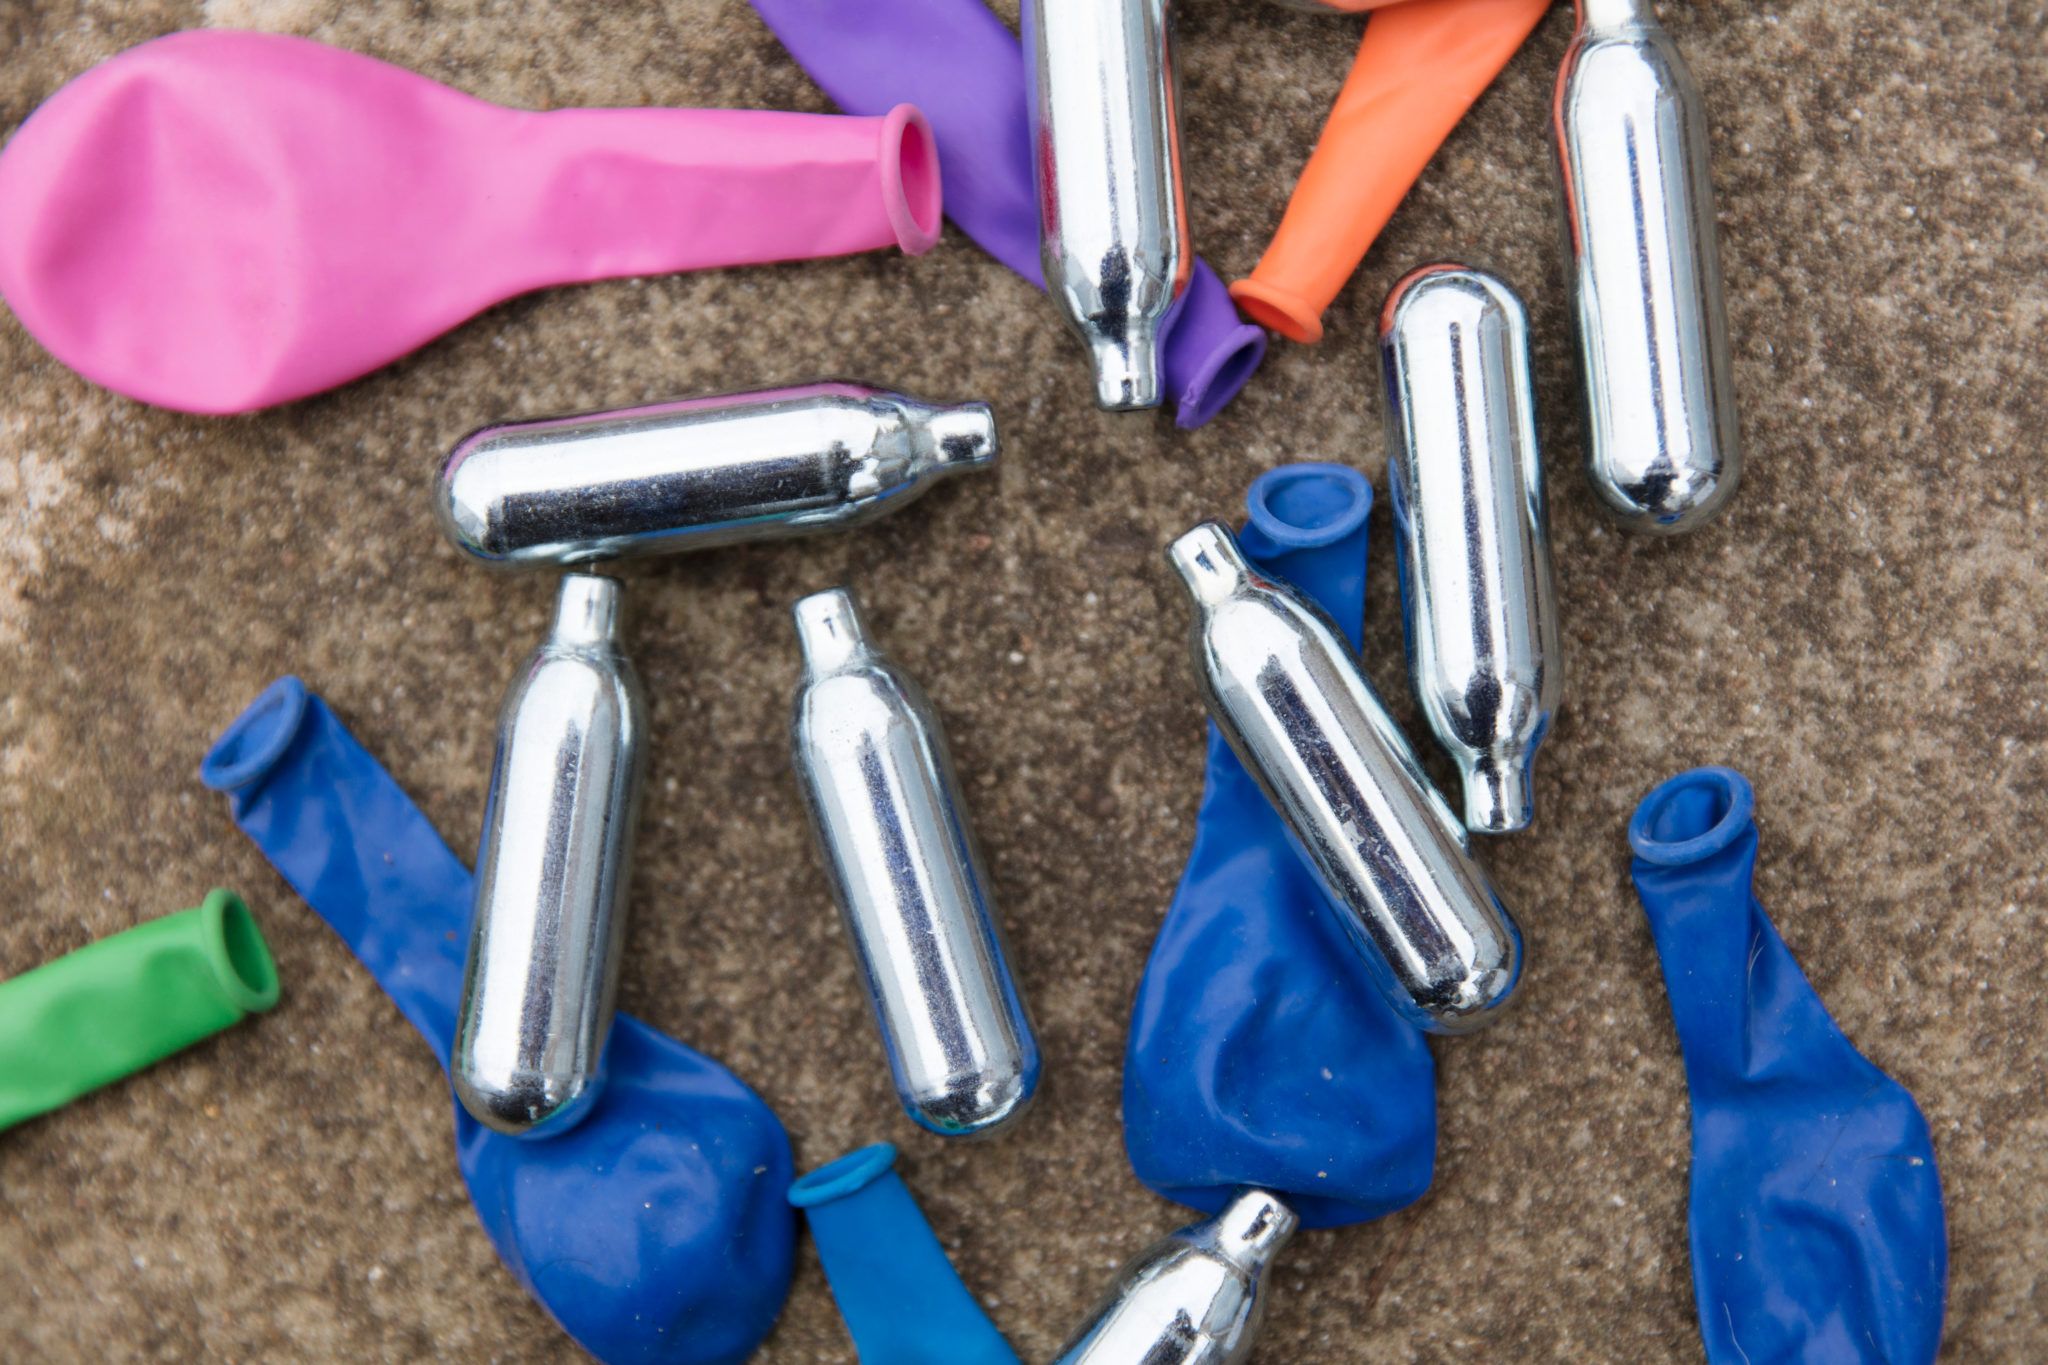 Laughing gas considered ‘more dangerous than cocaine’ according to neurologist